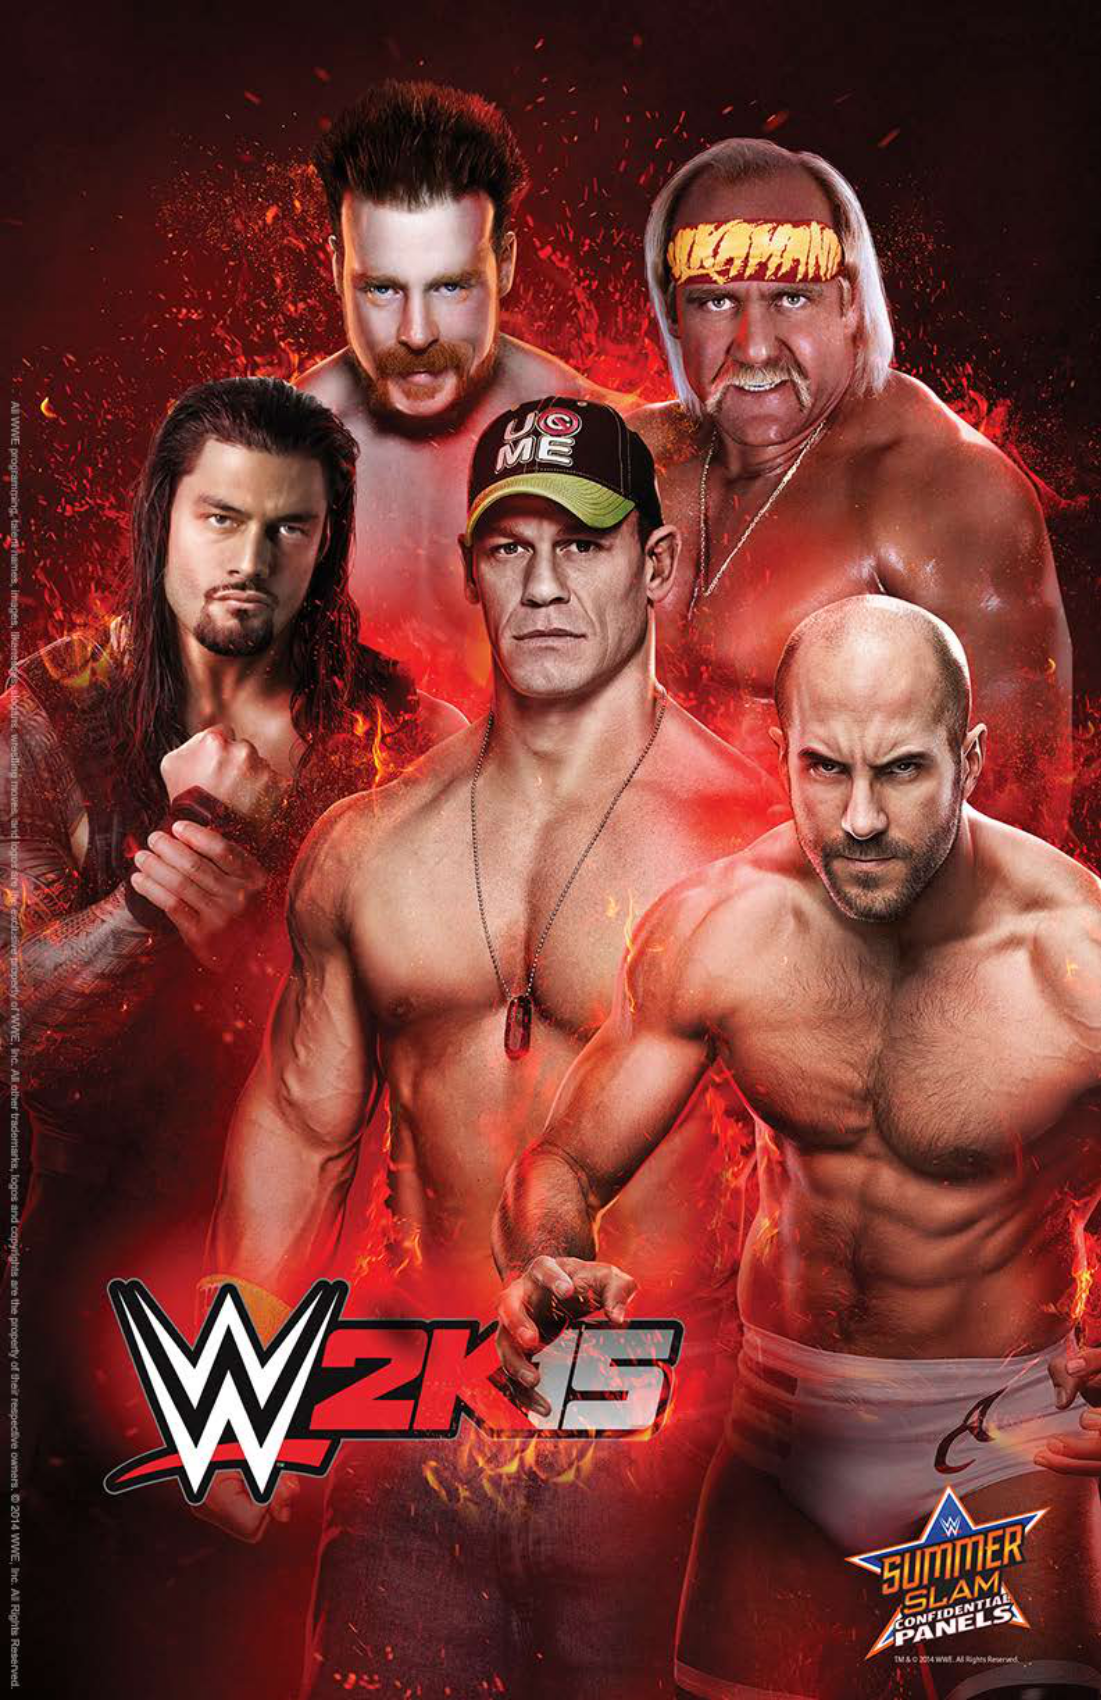 [Game PC] WWE 2K15 - RELOADED [Fighting | 2015]